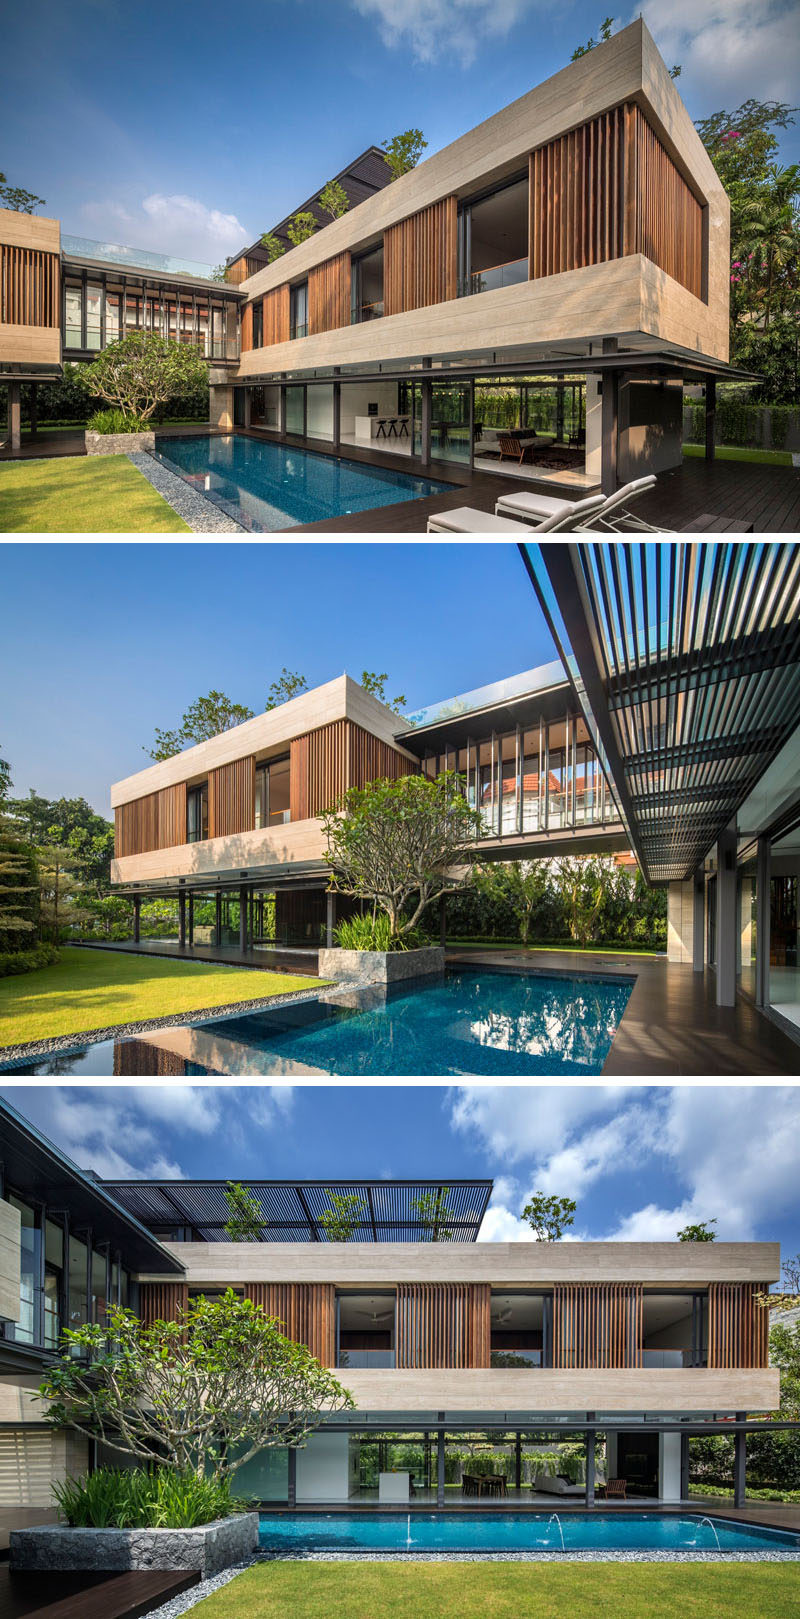 This Singaporean home has a lush garden, swimming pool, and a top floor wrapped in wooden louvers.